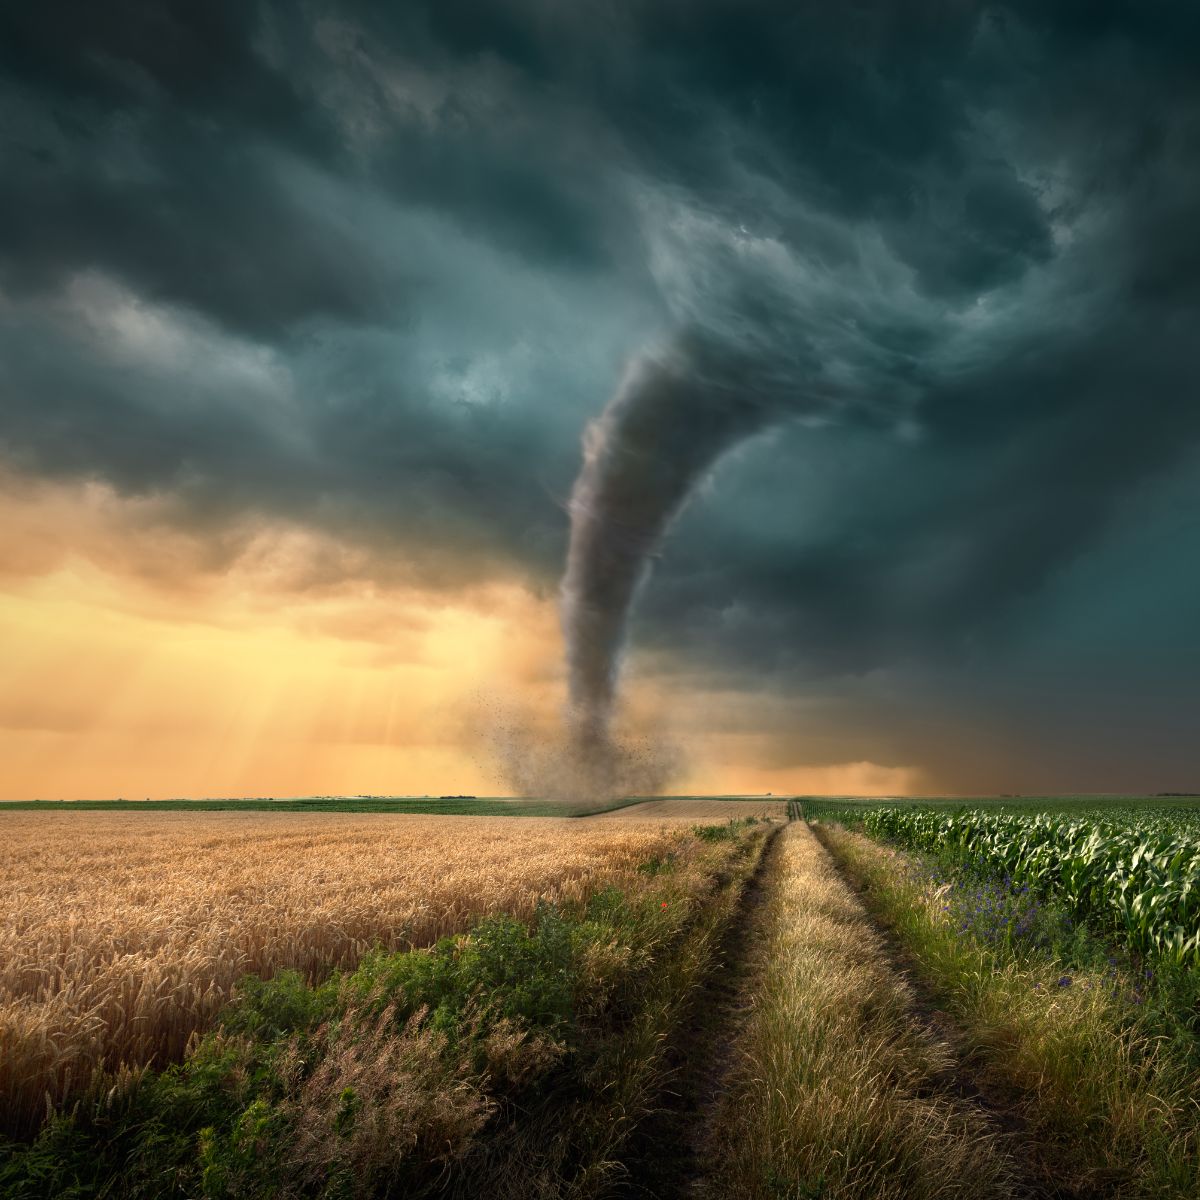 What is the spiritual meaning of dreaming of a tornado